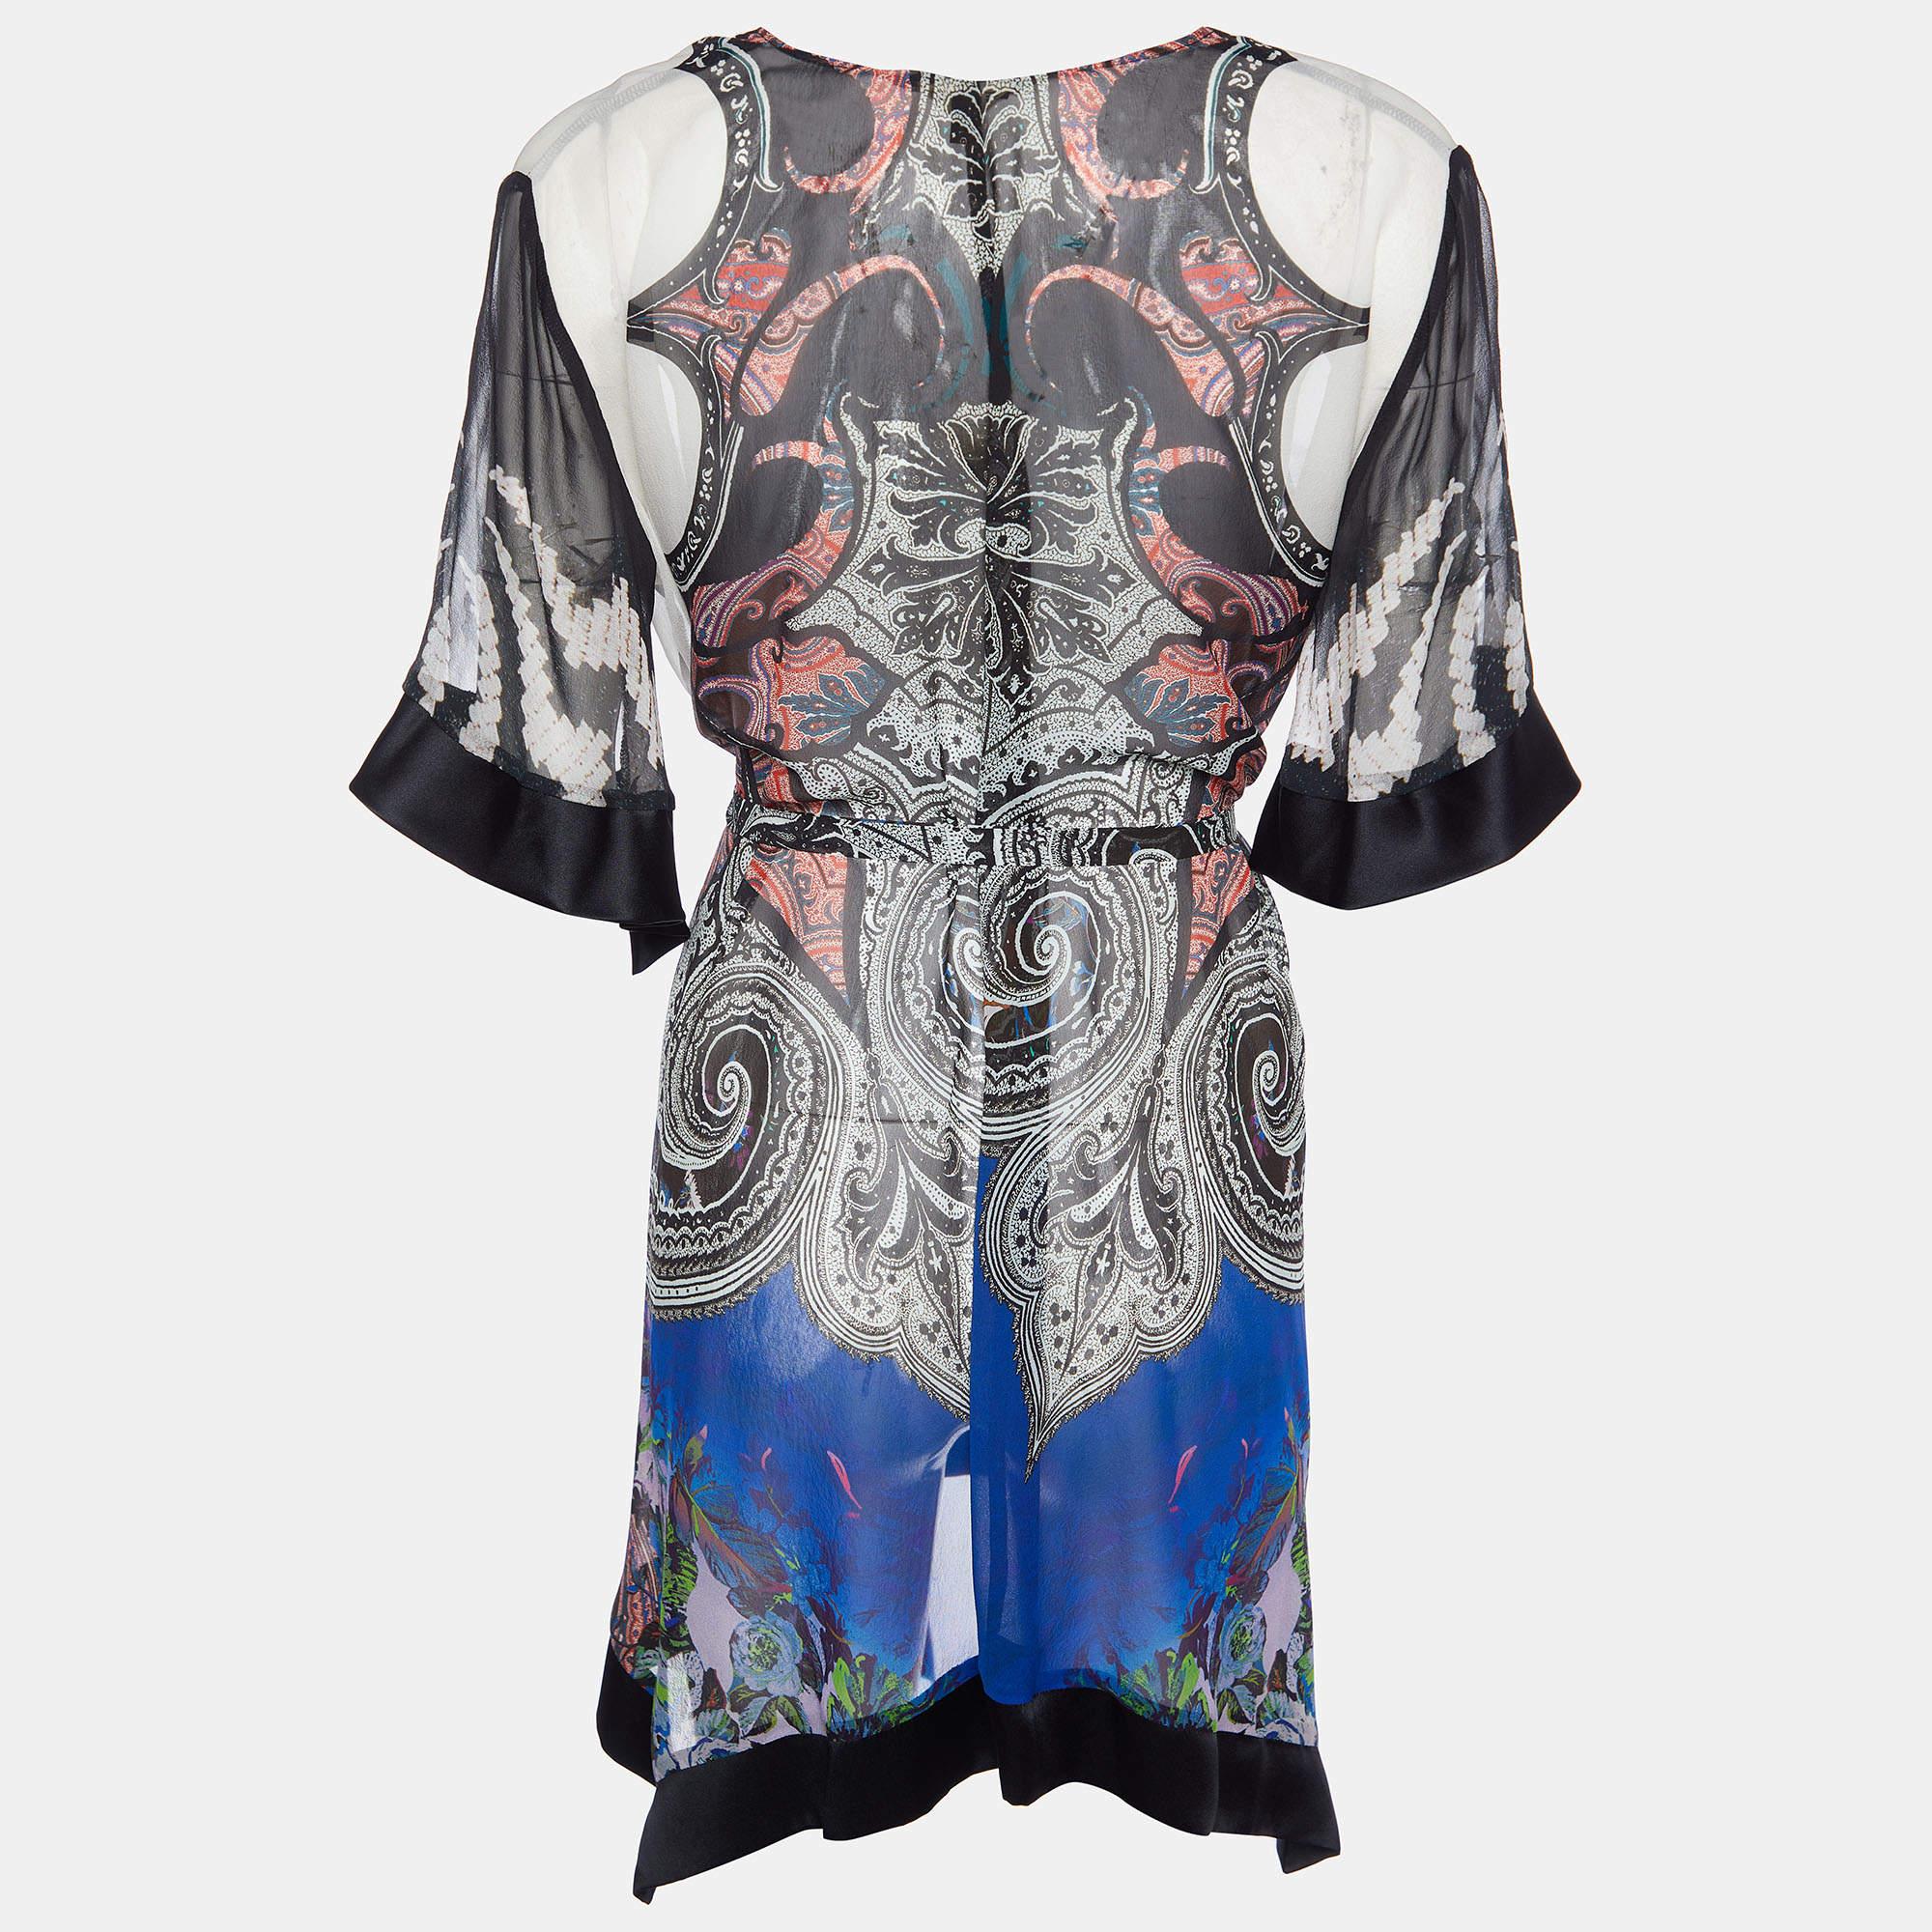 Elevate your fashion quotient by donning this multicolor dress from Etro. It has a flattering silhouette and displays an intricate paisley print all over. It will look amazing with high heels and a clutch.

Includes: Brand Tag, Belt